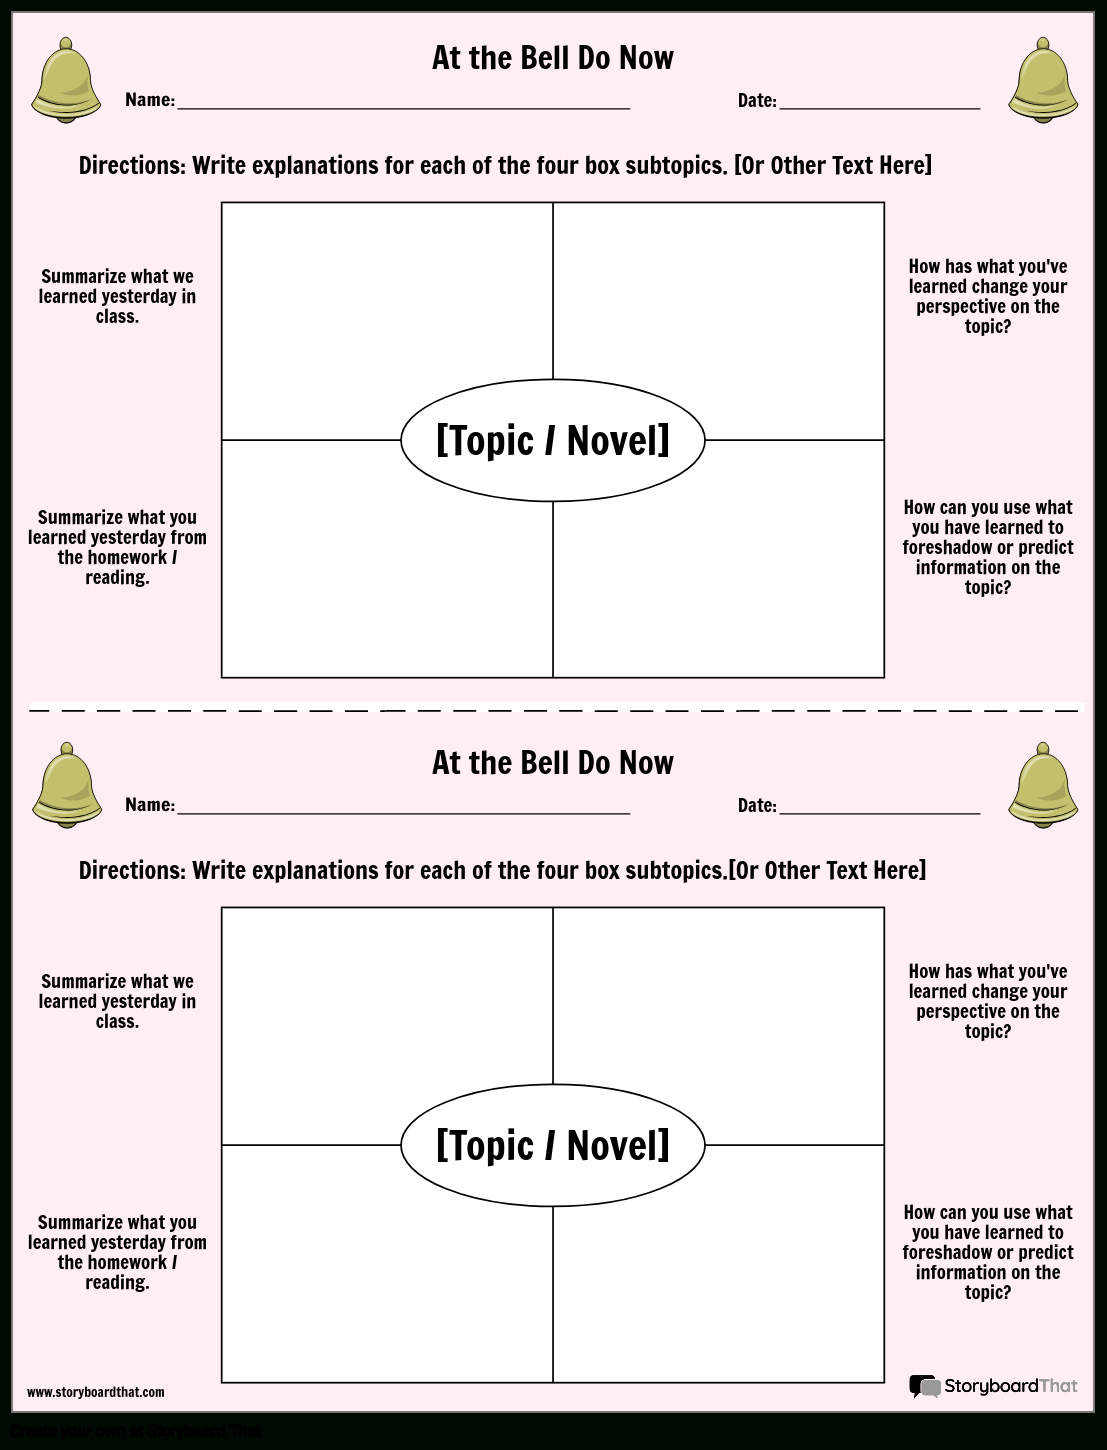 Free Printable Bell Ringers Templates | Storyboardthat pertaining to Free Printable Bell Ringers